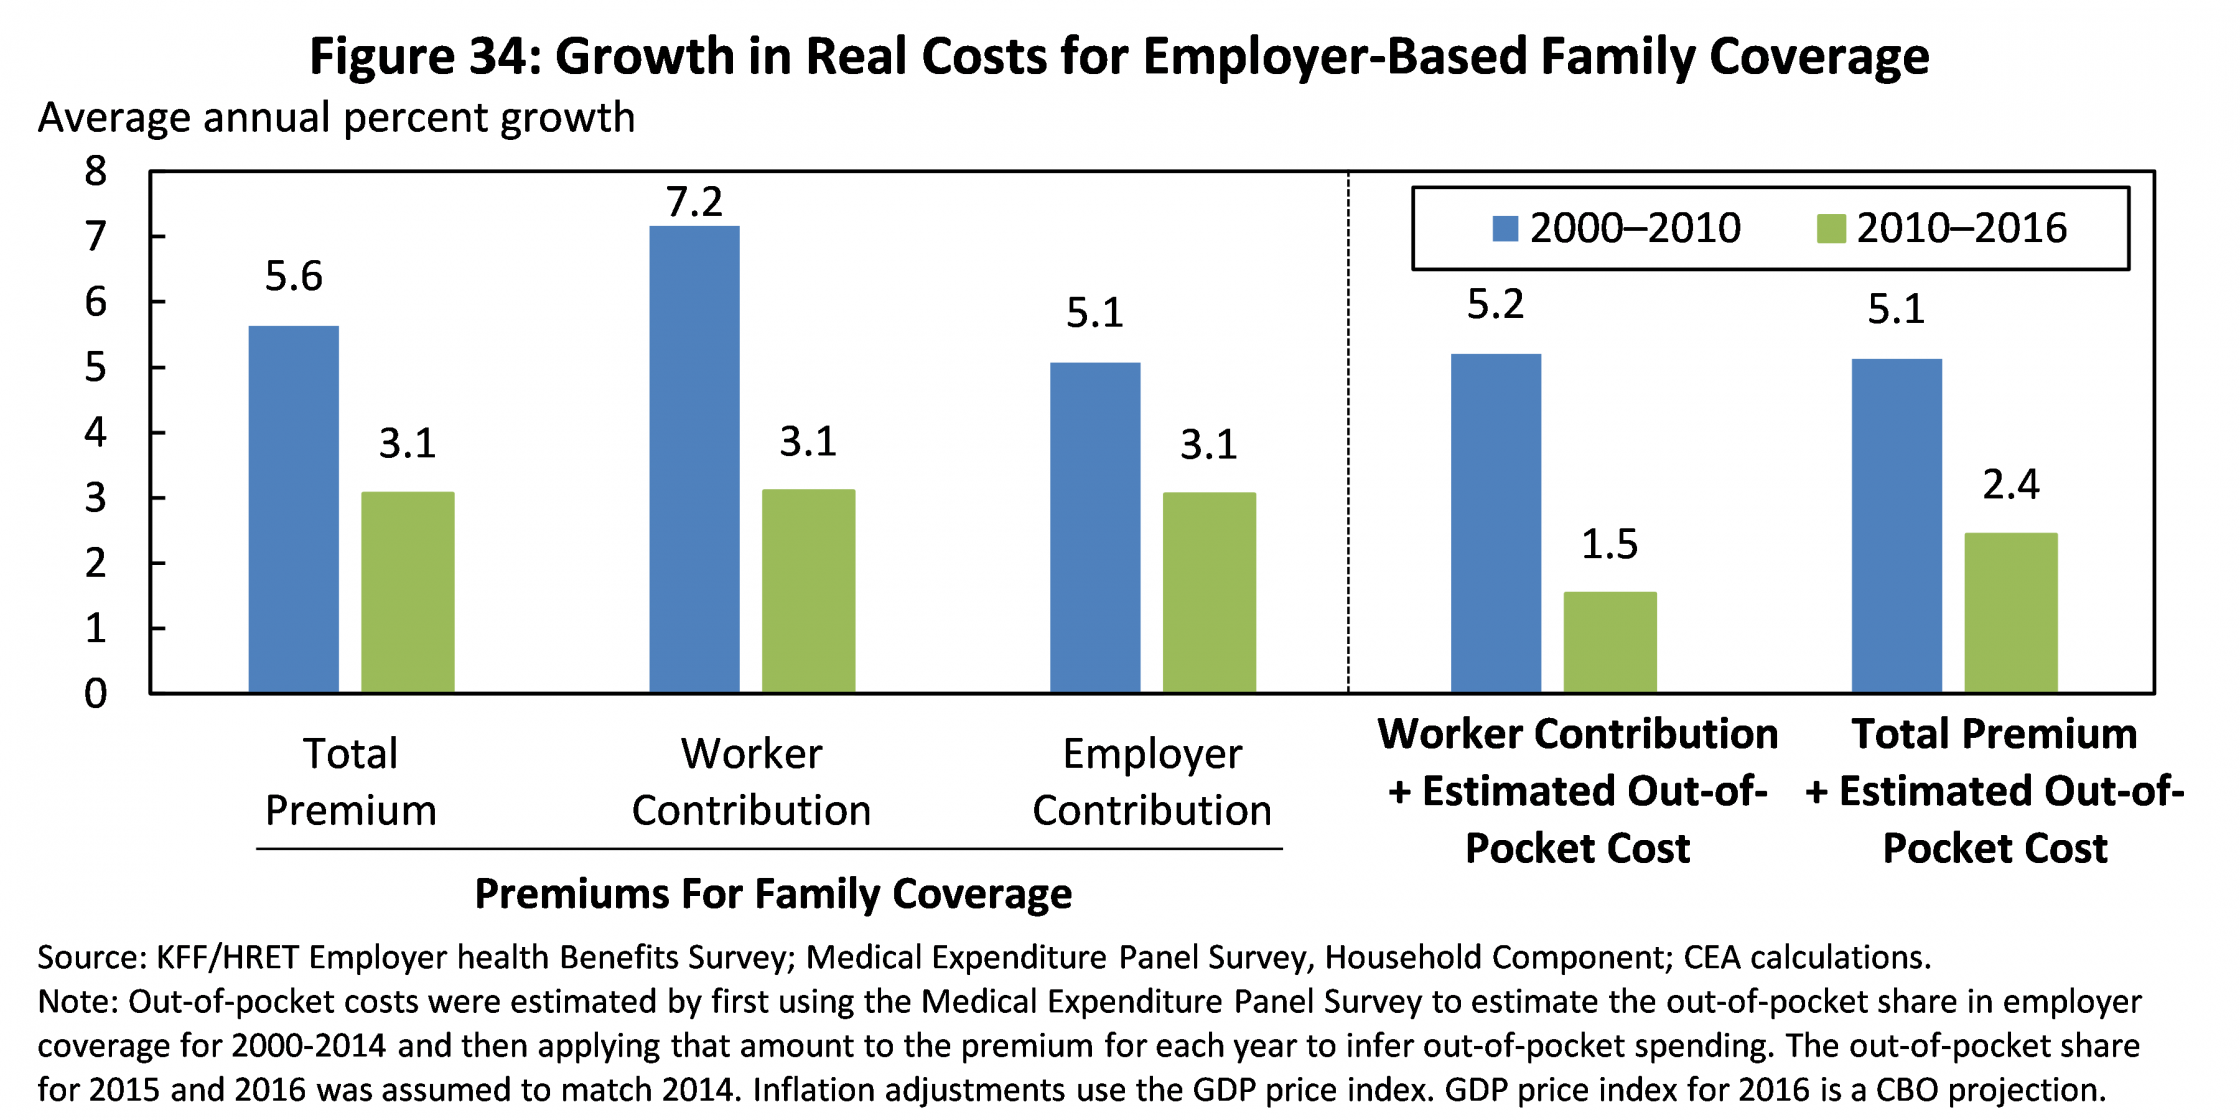 Growth in Real Costs for Employer-Based Family Coverage